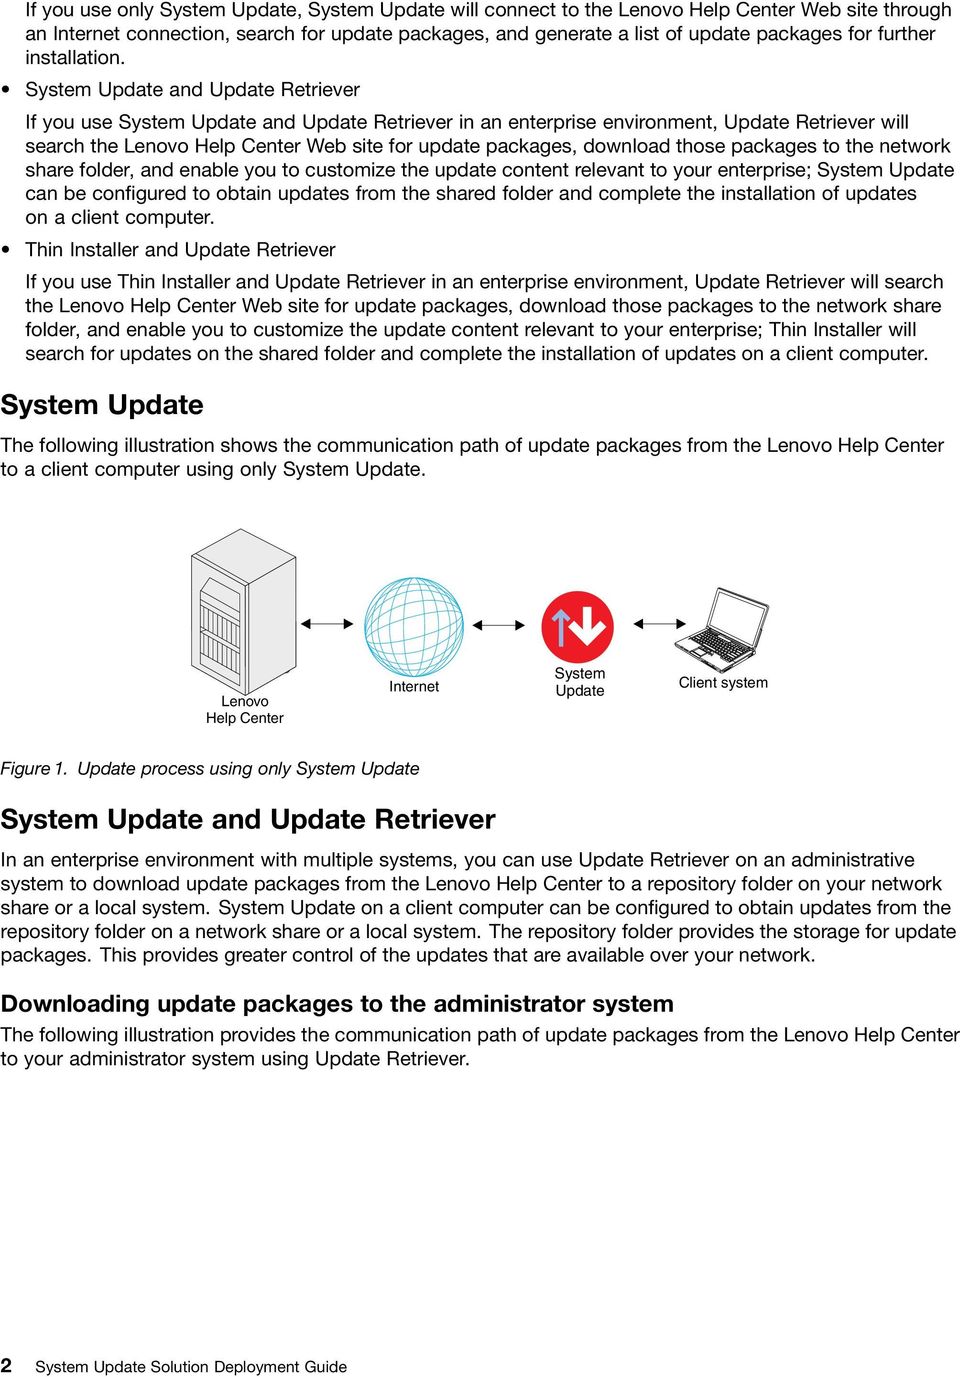 System Update and Update Retriever If you use System Update and Update Retriever in an enterprise environment, Update Retriever will search the Lenovo Help Center Web site for update packages,